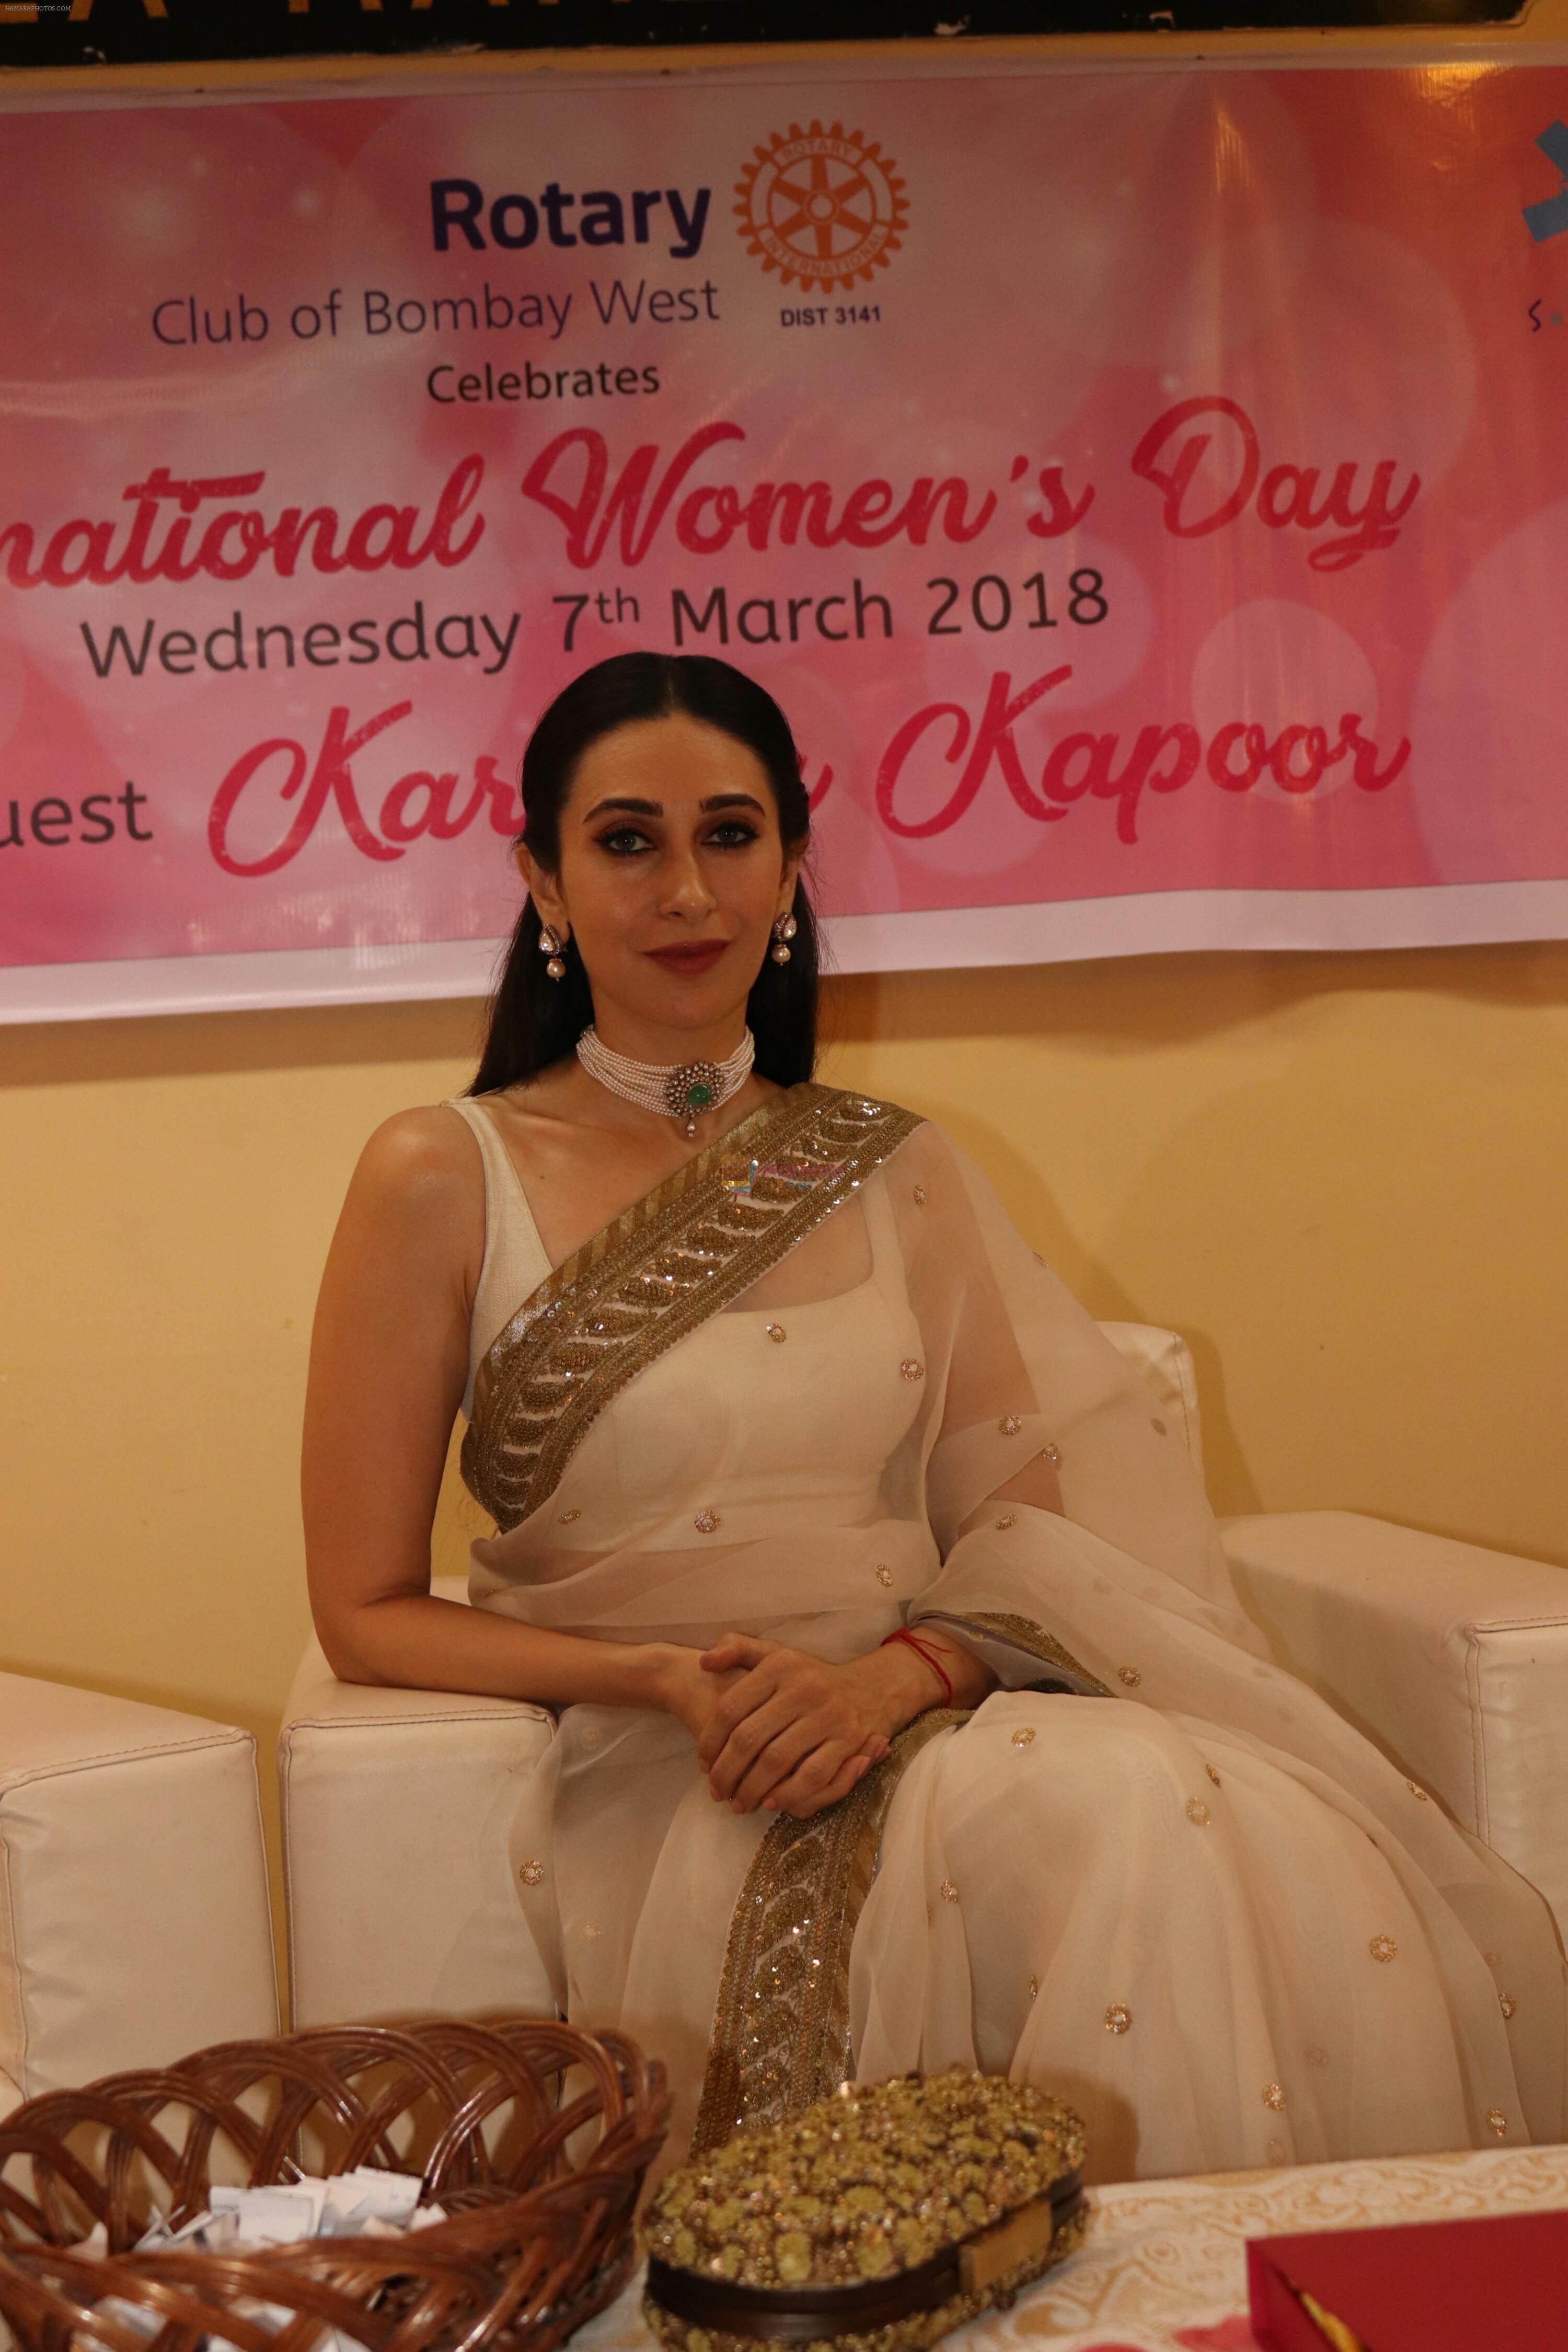 Karisma Kapoor Honoured With Extraordinary Women Award on 7th March 2018